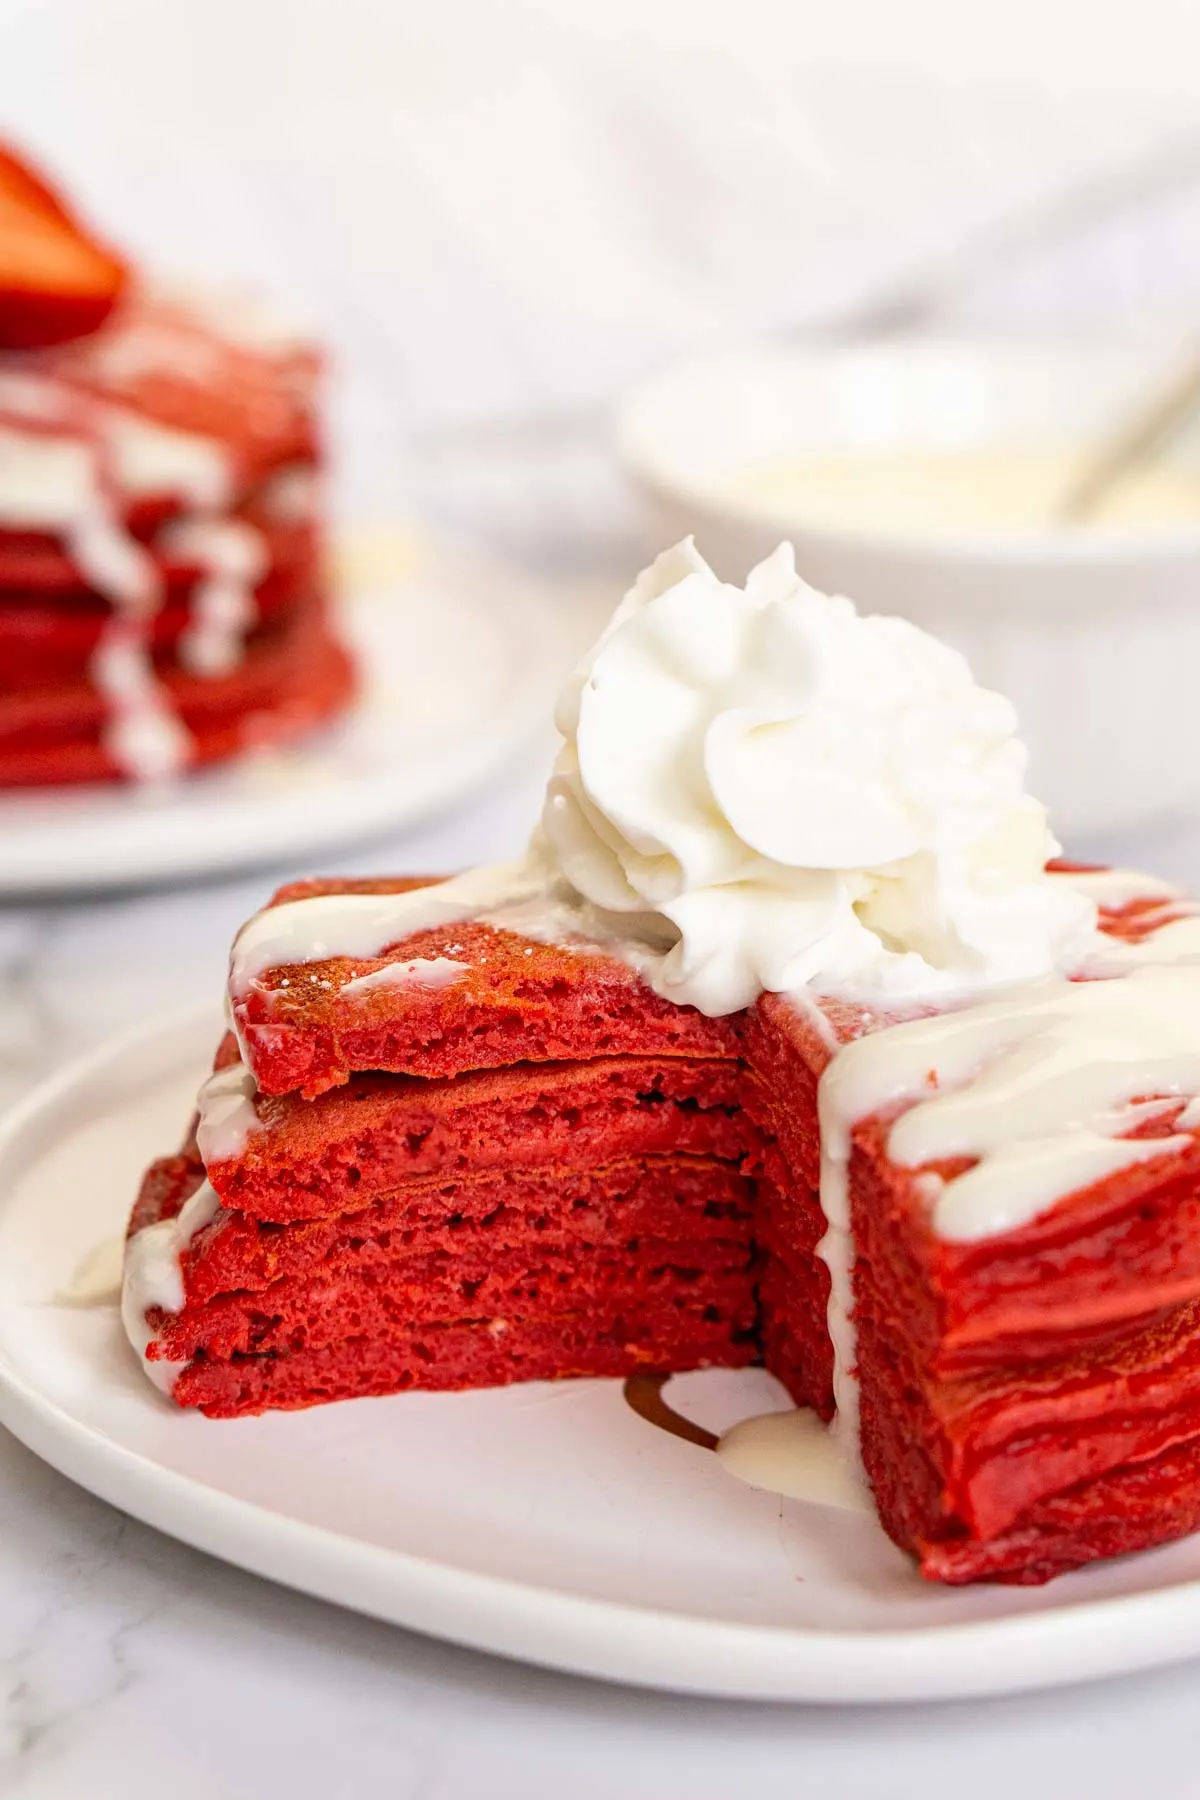 Red velvet pancakes with a slice cut out to show inside texture.